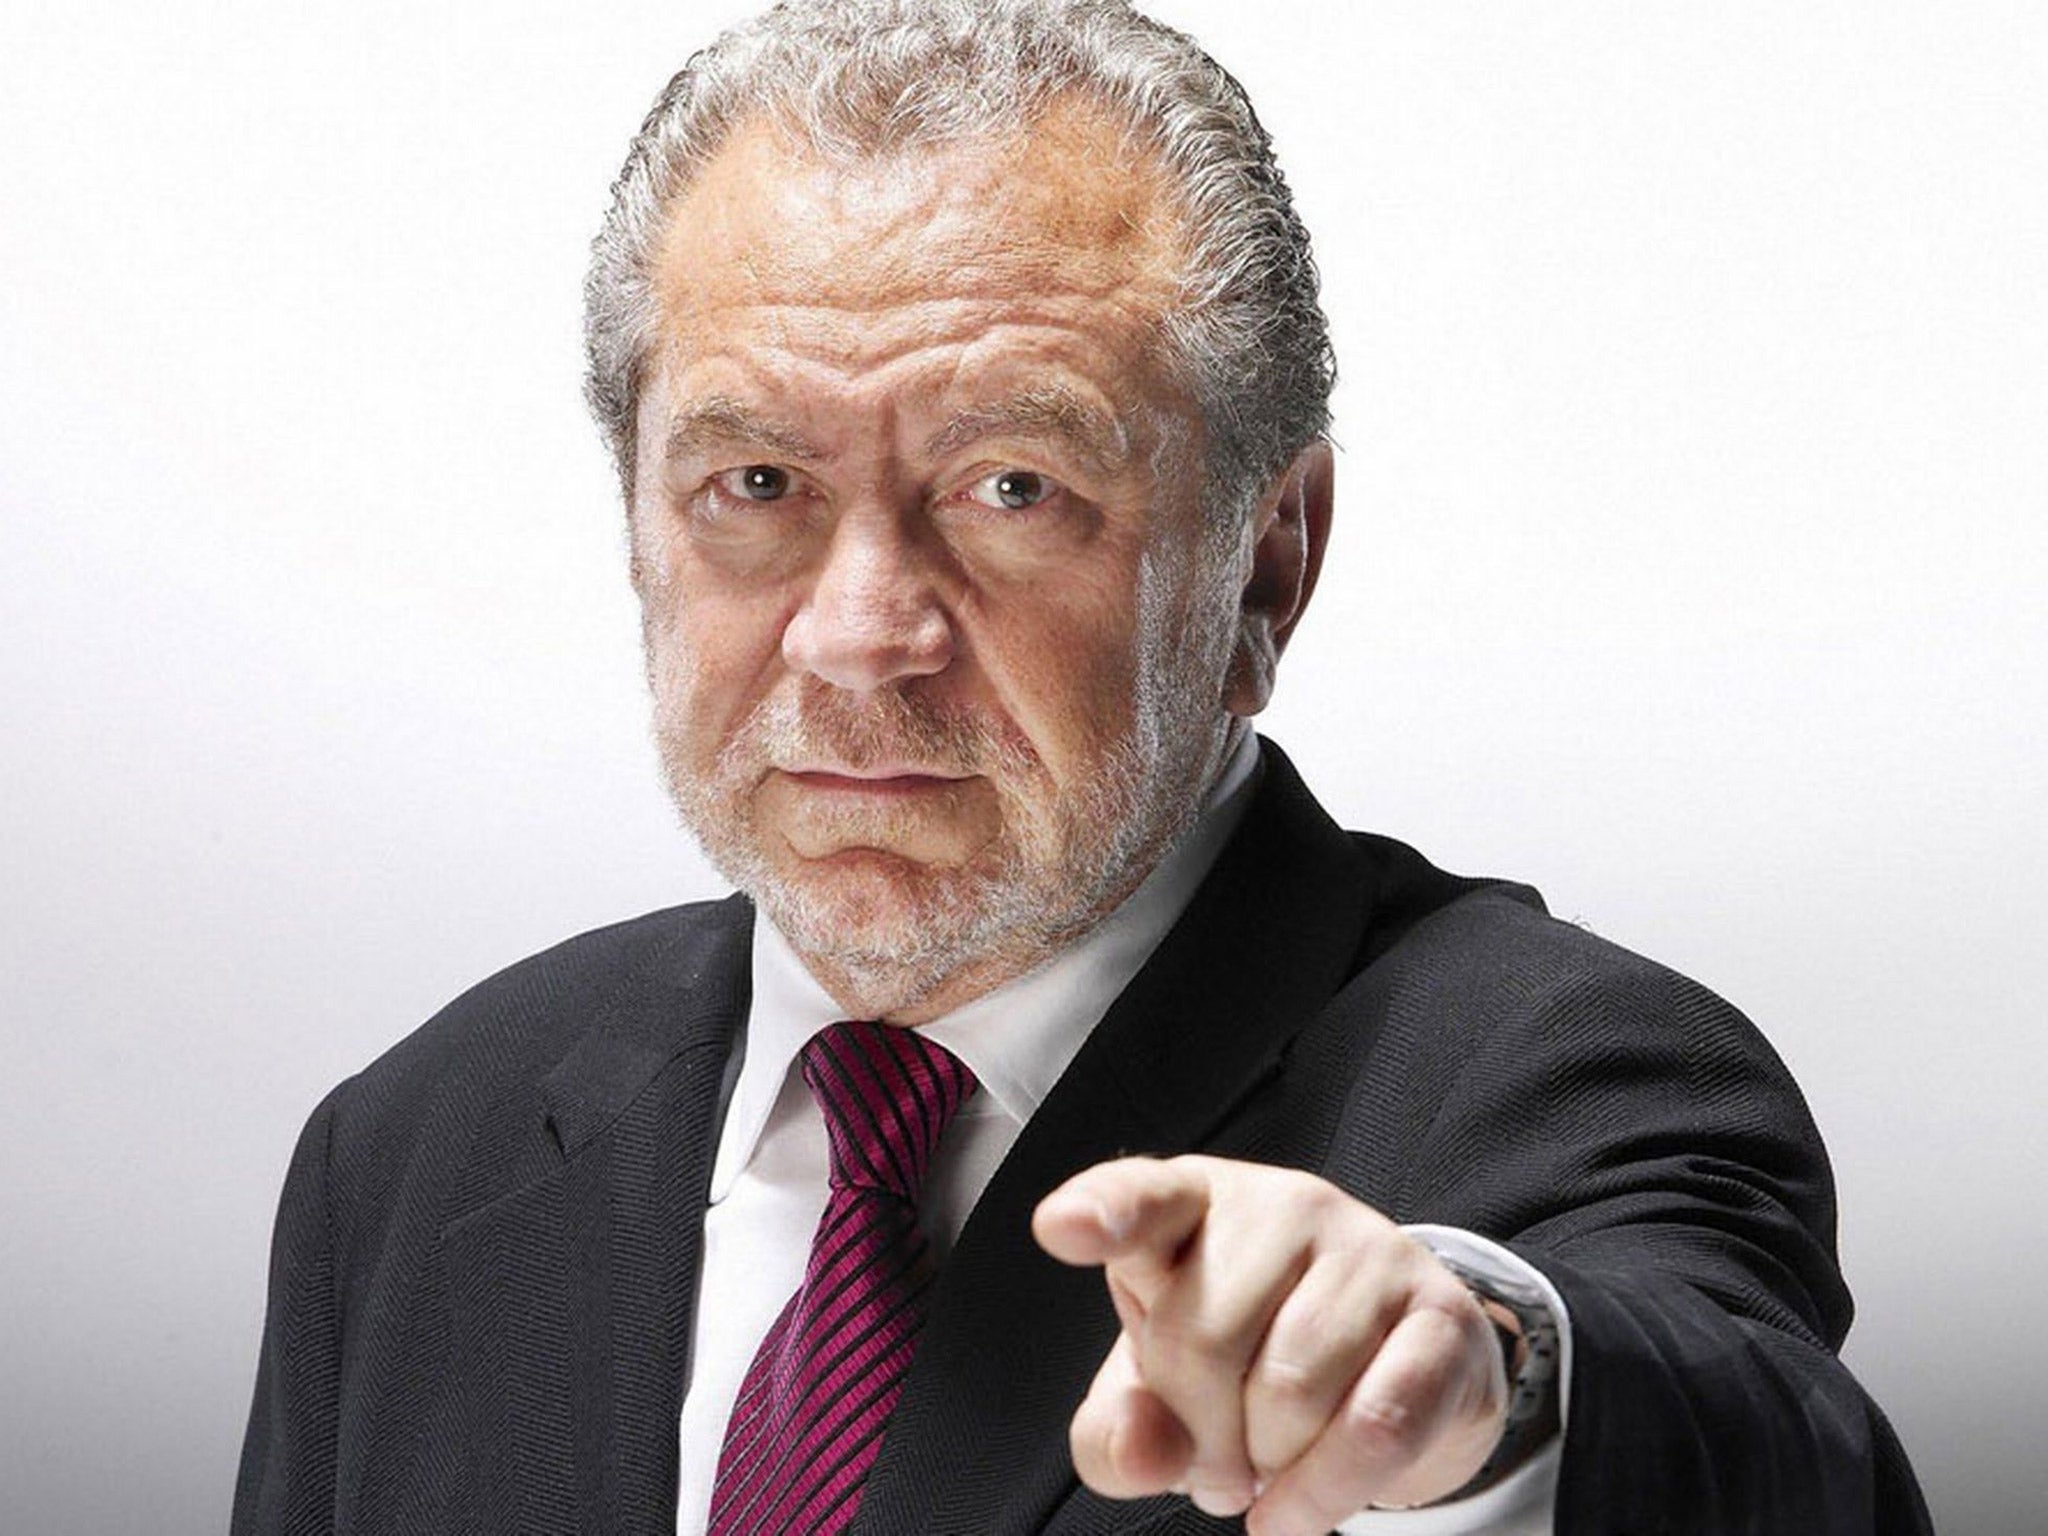 A new series of The Apprentice starts on Wednesday 4 October.